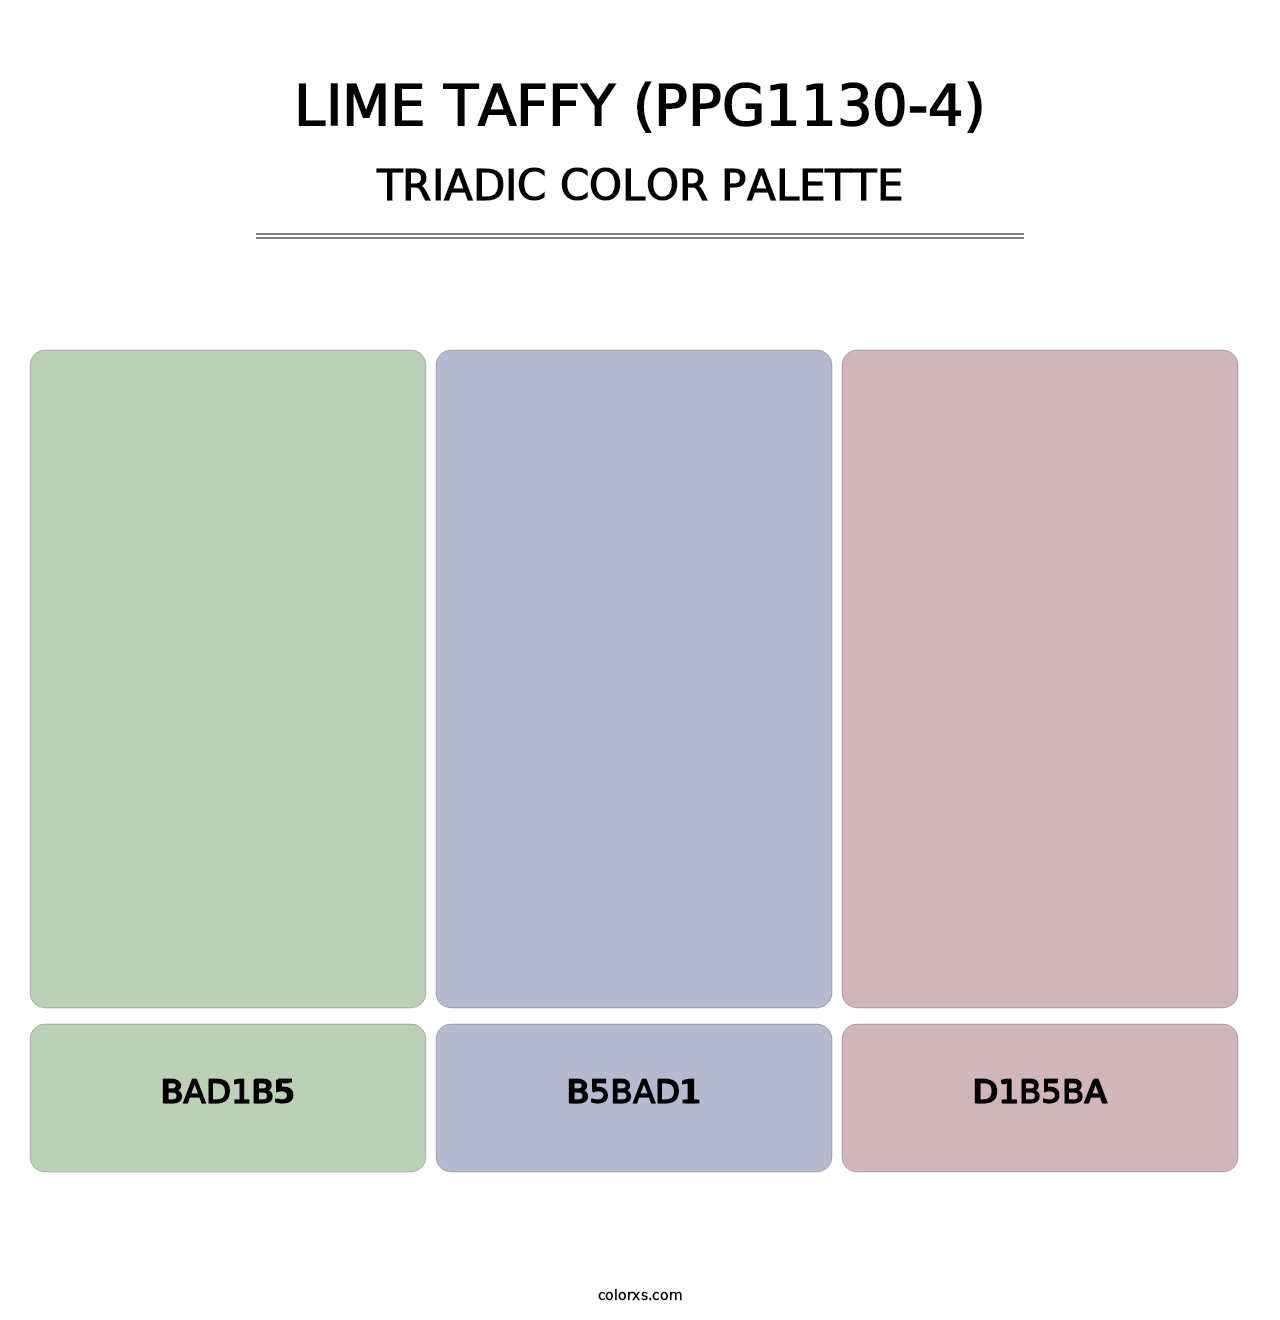 Lime Taffy (PPG1130-4) - Triadic Color Palette